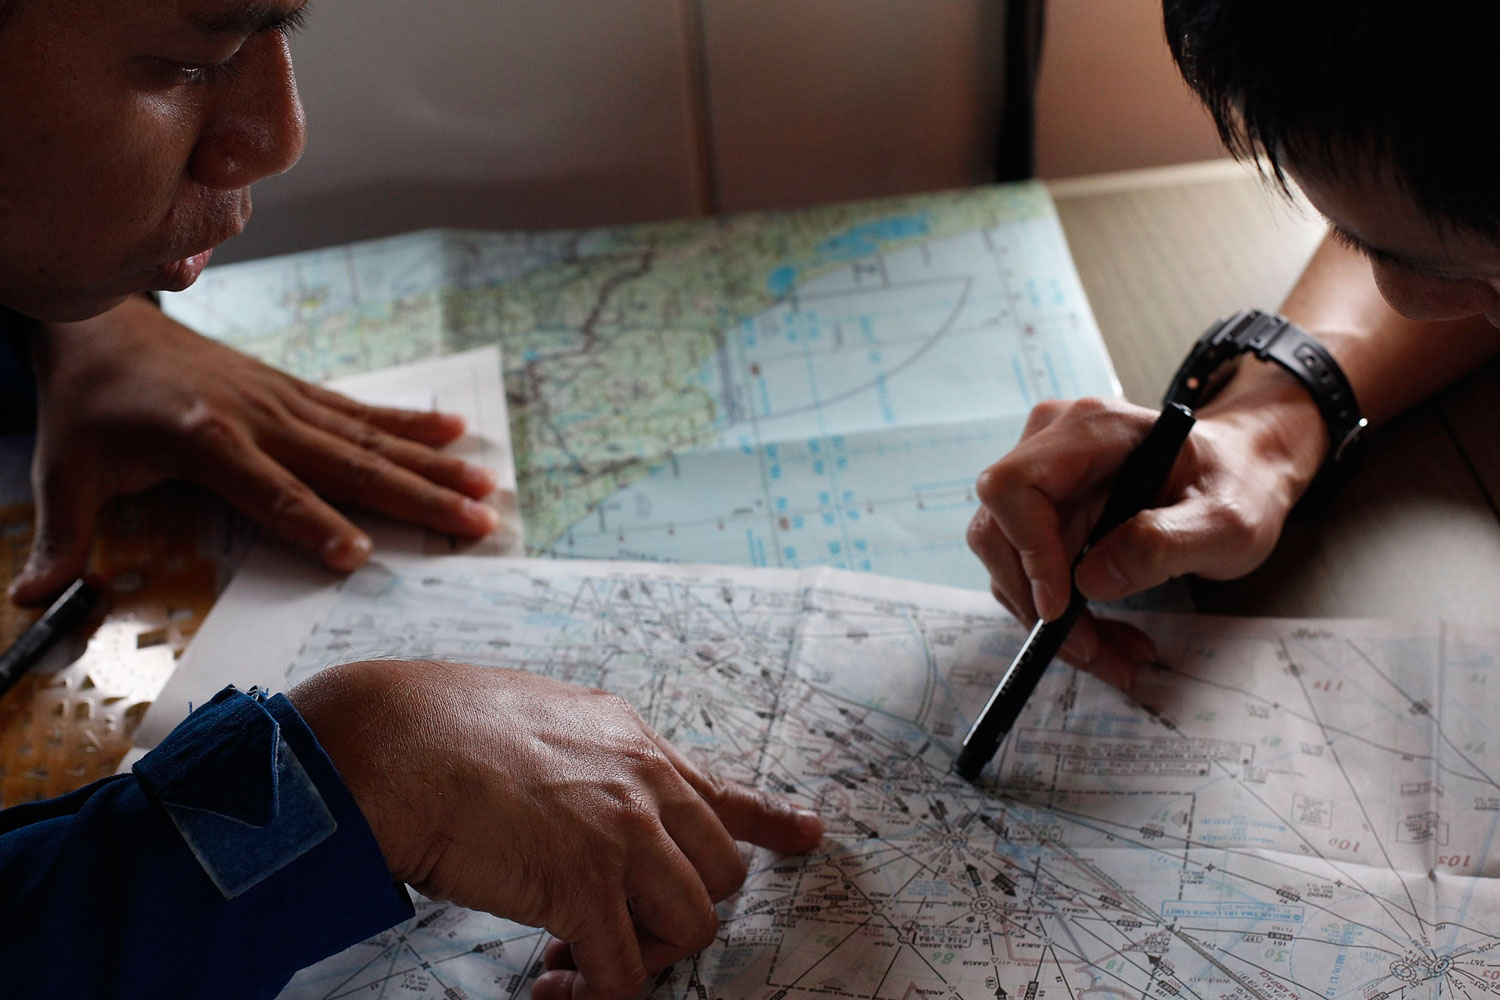 JCG studies a map with a Malaysian Maritime Enforcement Agency pilot in JCG's Gulfstream V Jet aircraft as they search for the missing plane over the South China Sea